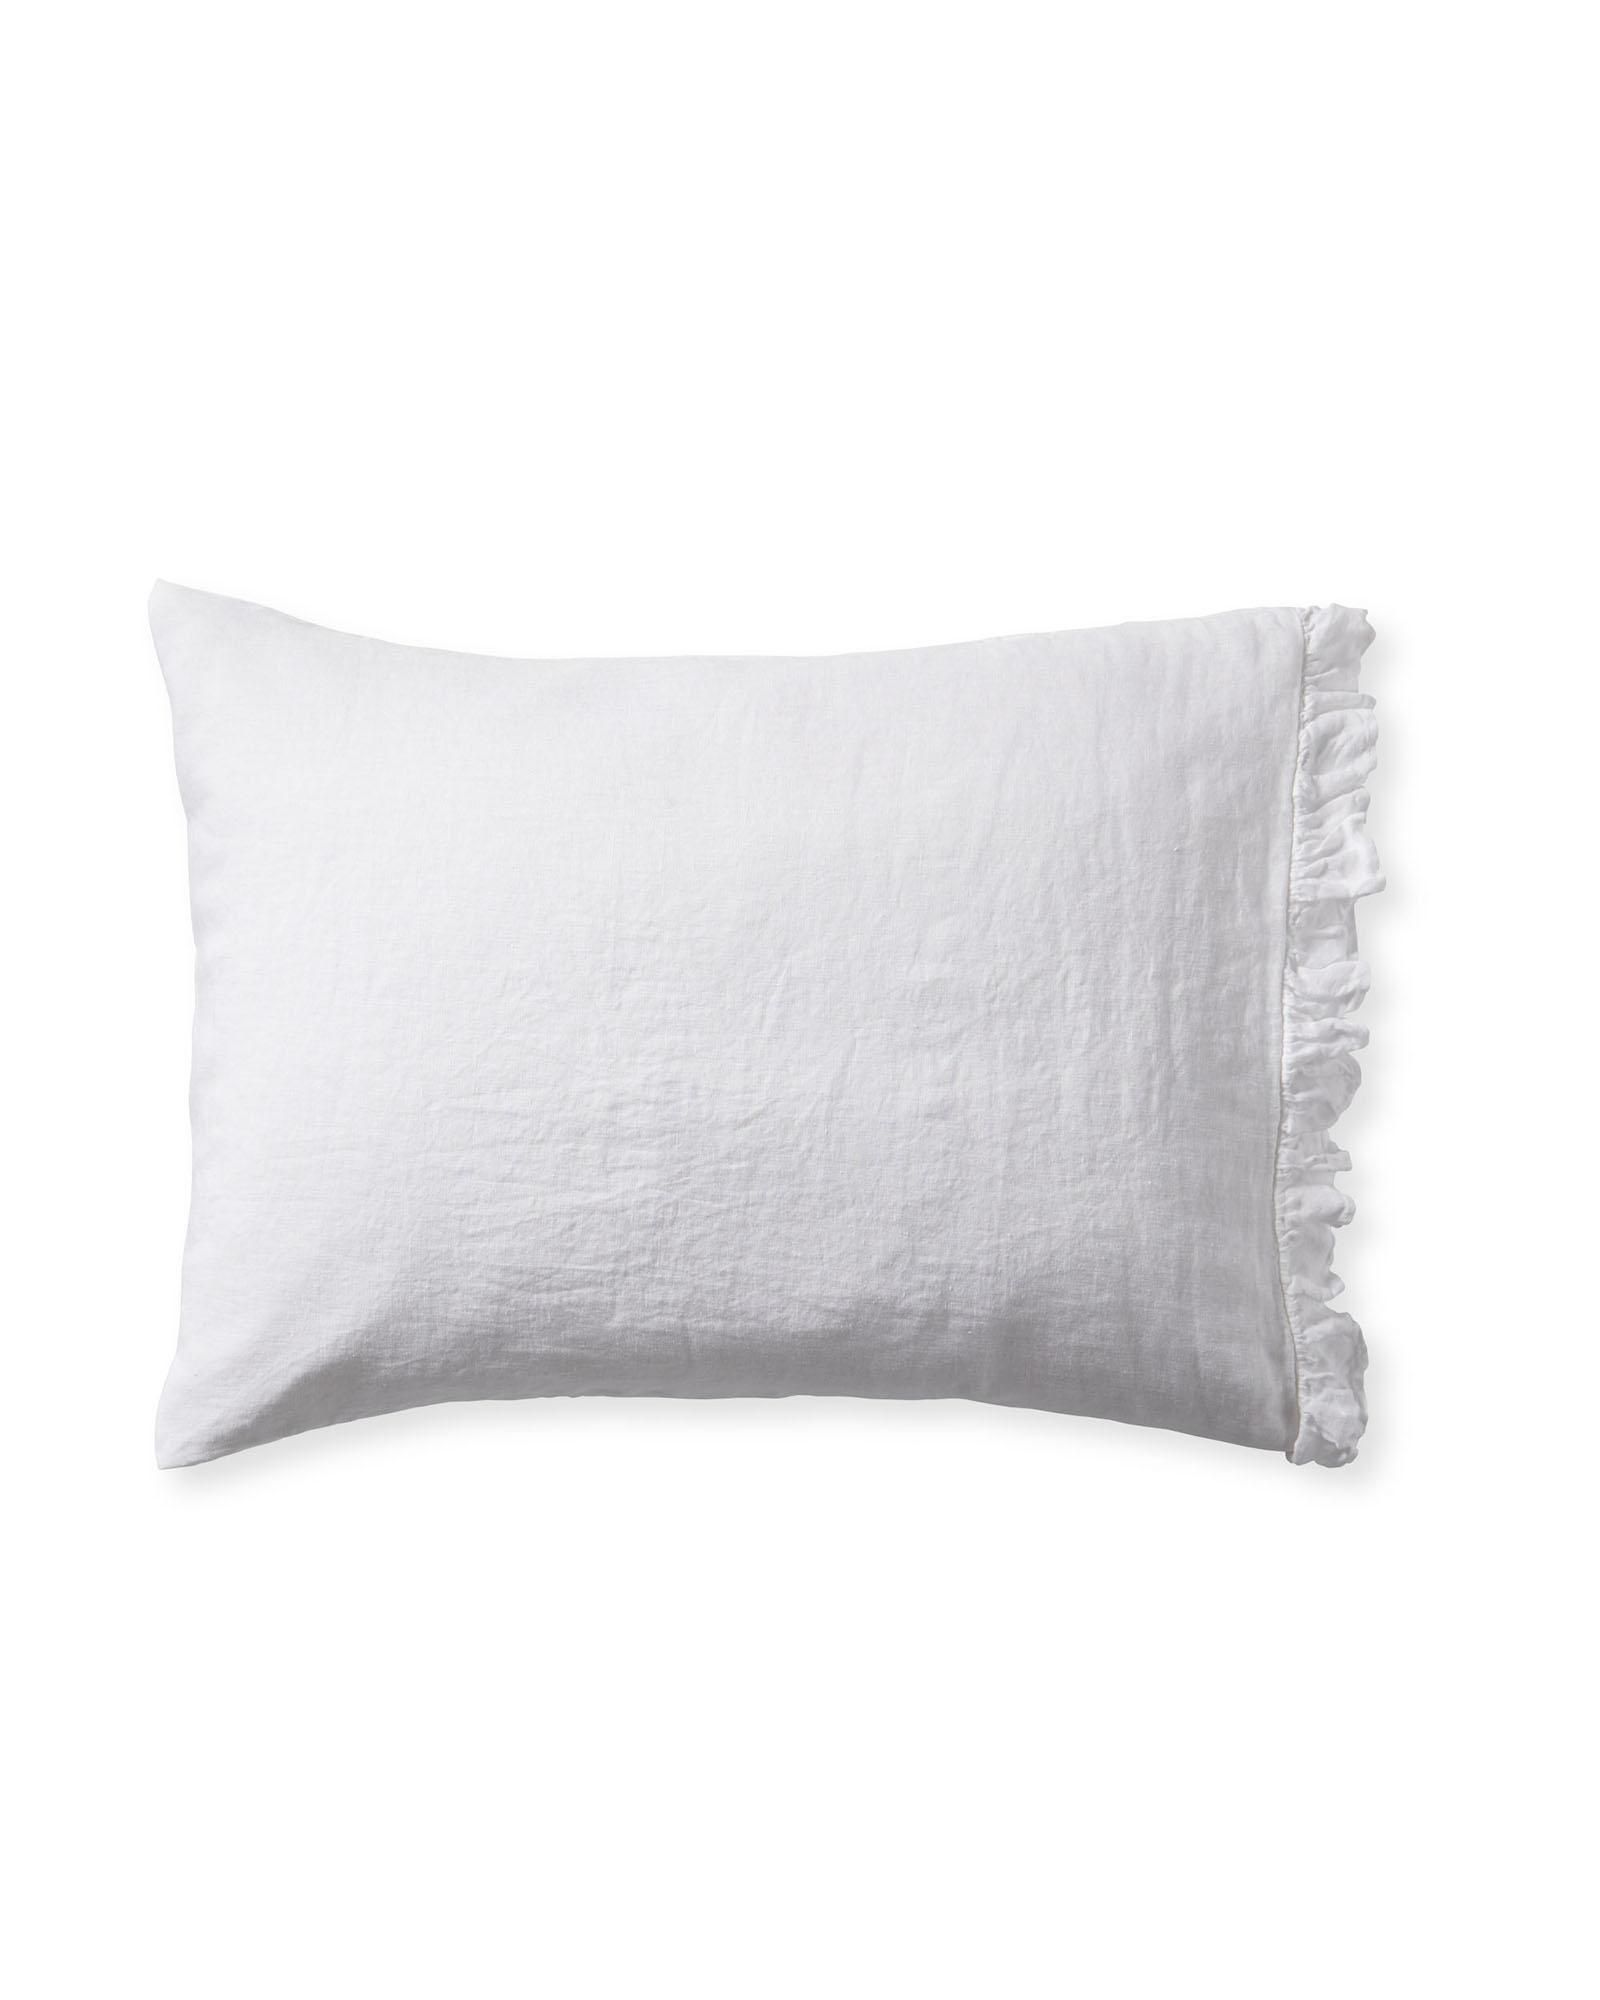 Nantucket Linen Pillowcases (Set of 2) | Serena and Lily